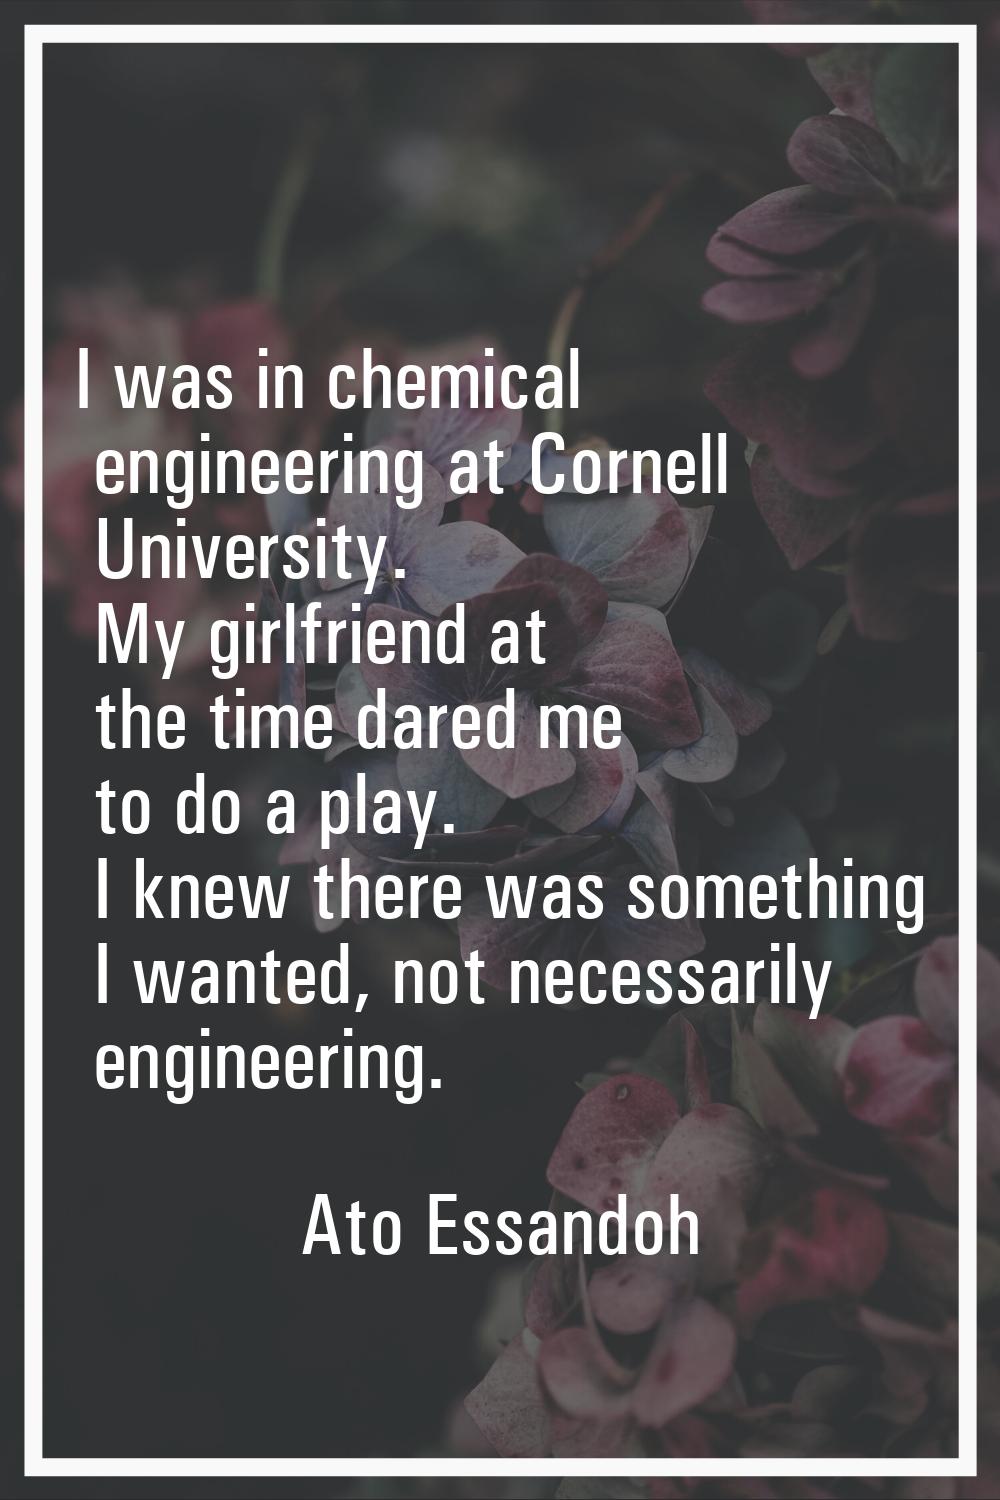 I was in chemical engineering at Cornell University. My girlfriend at the time dared me to do a pla